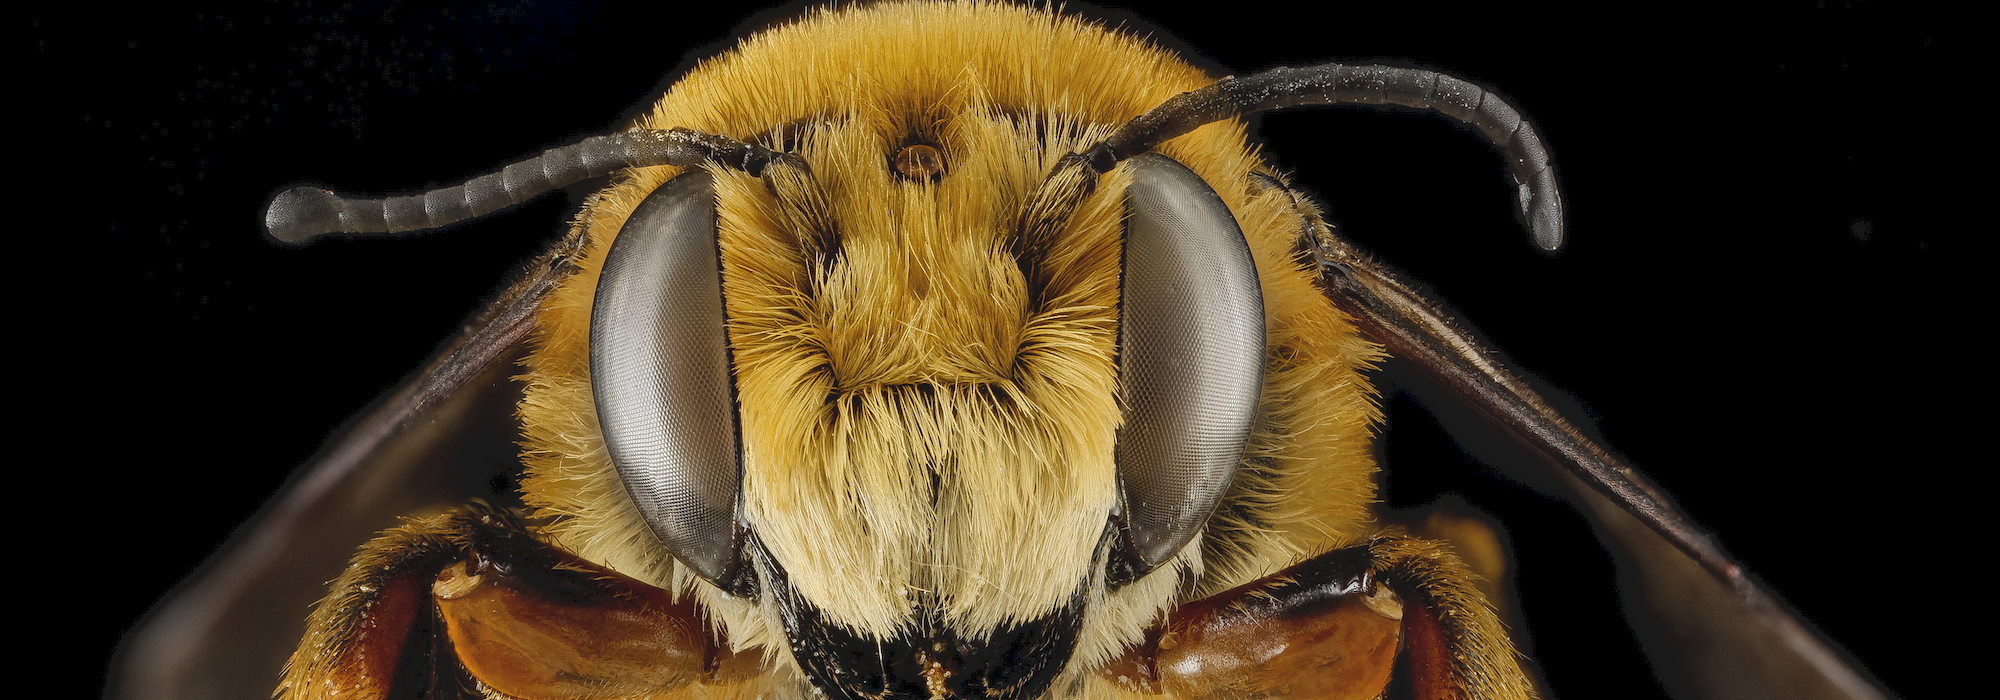 Megachile fortis bee